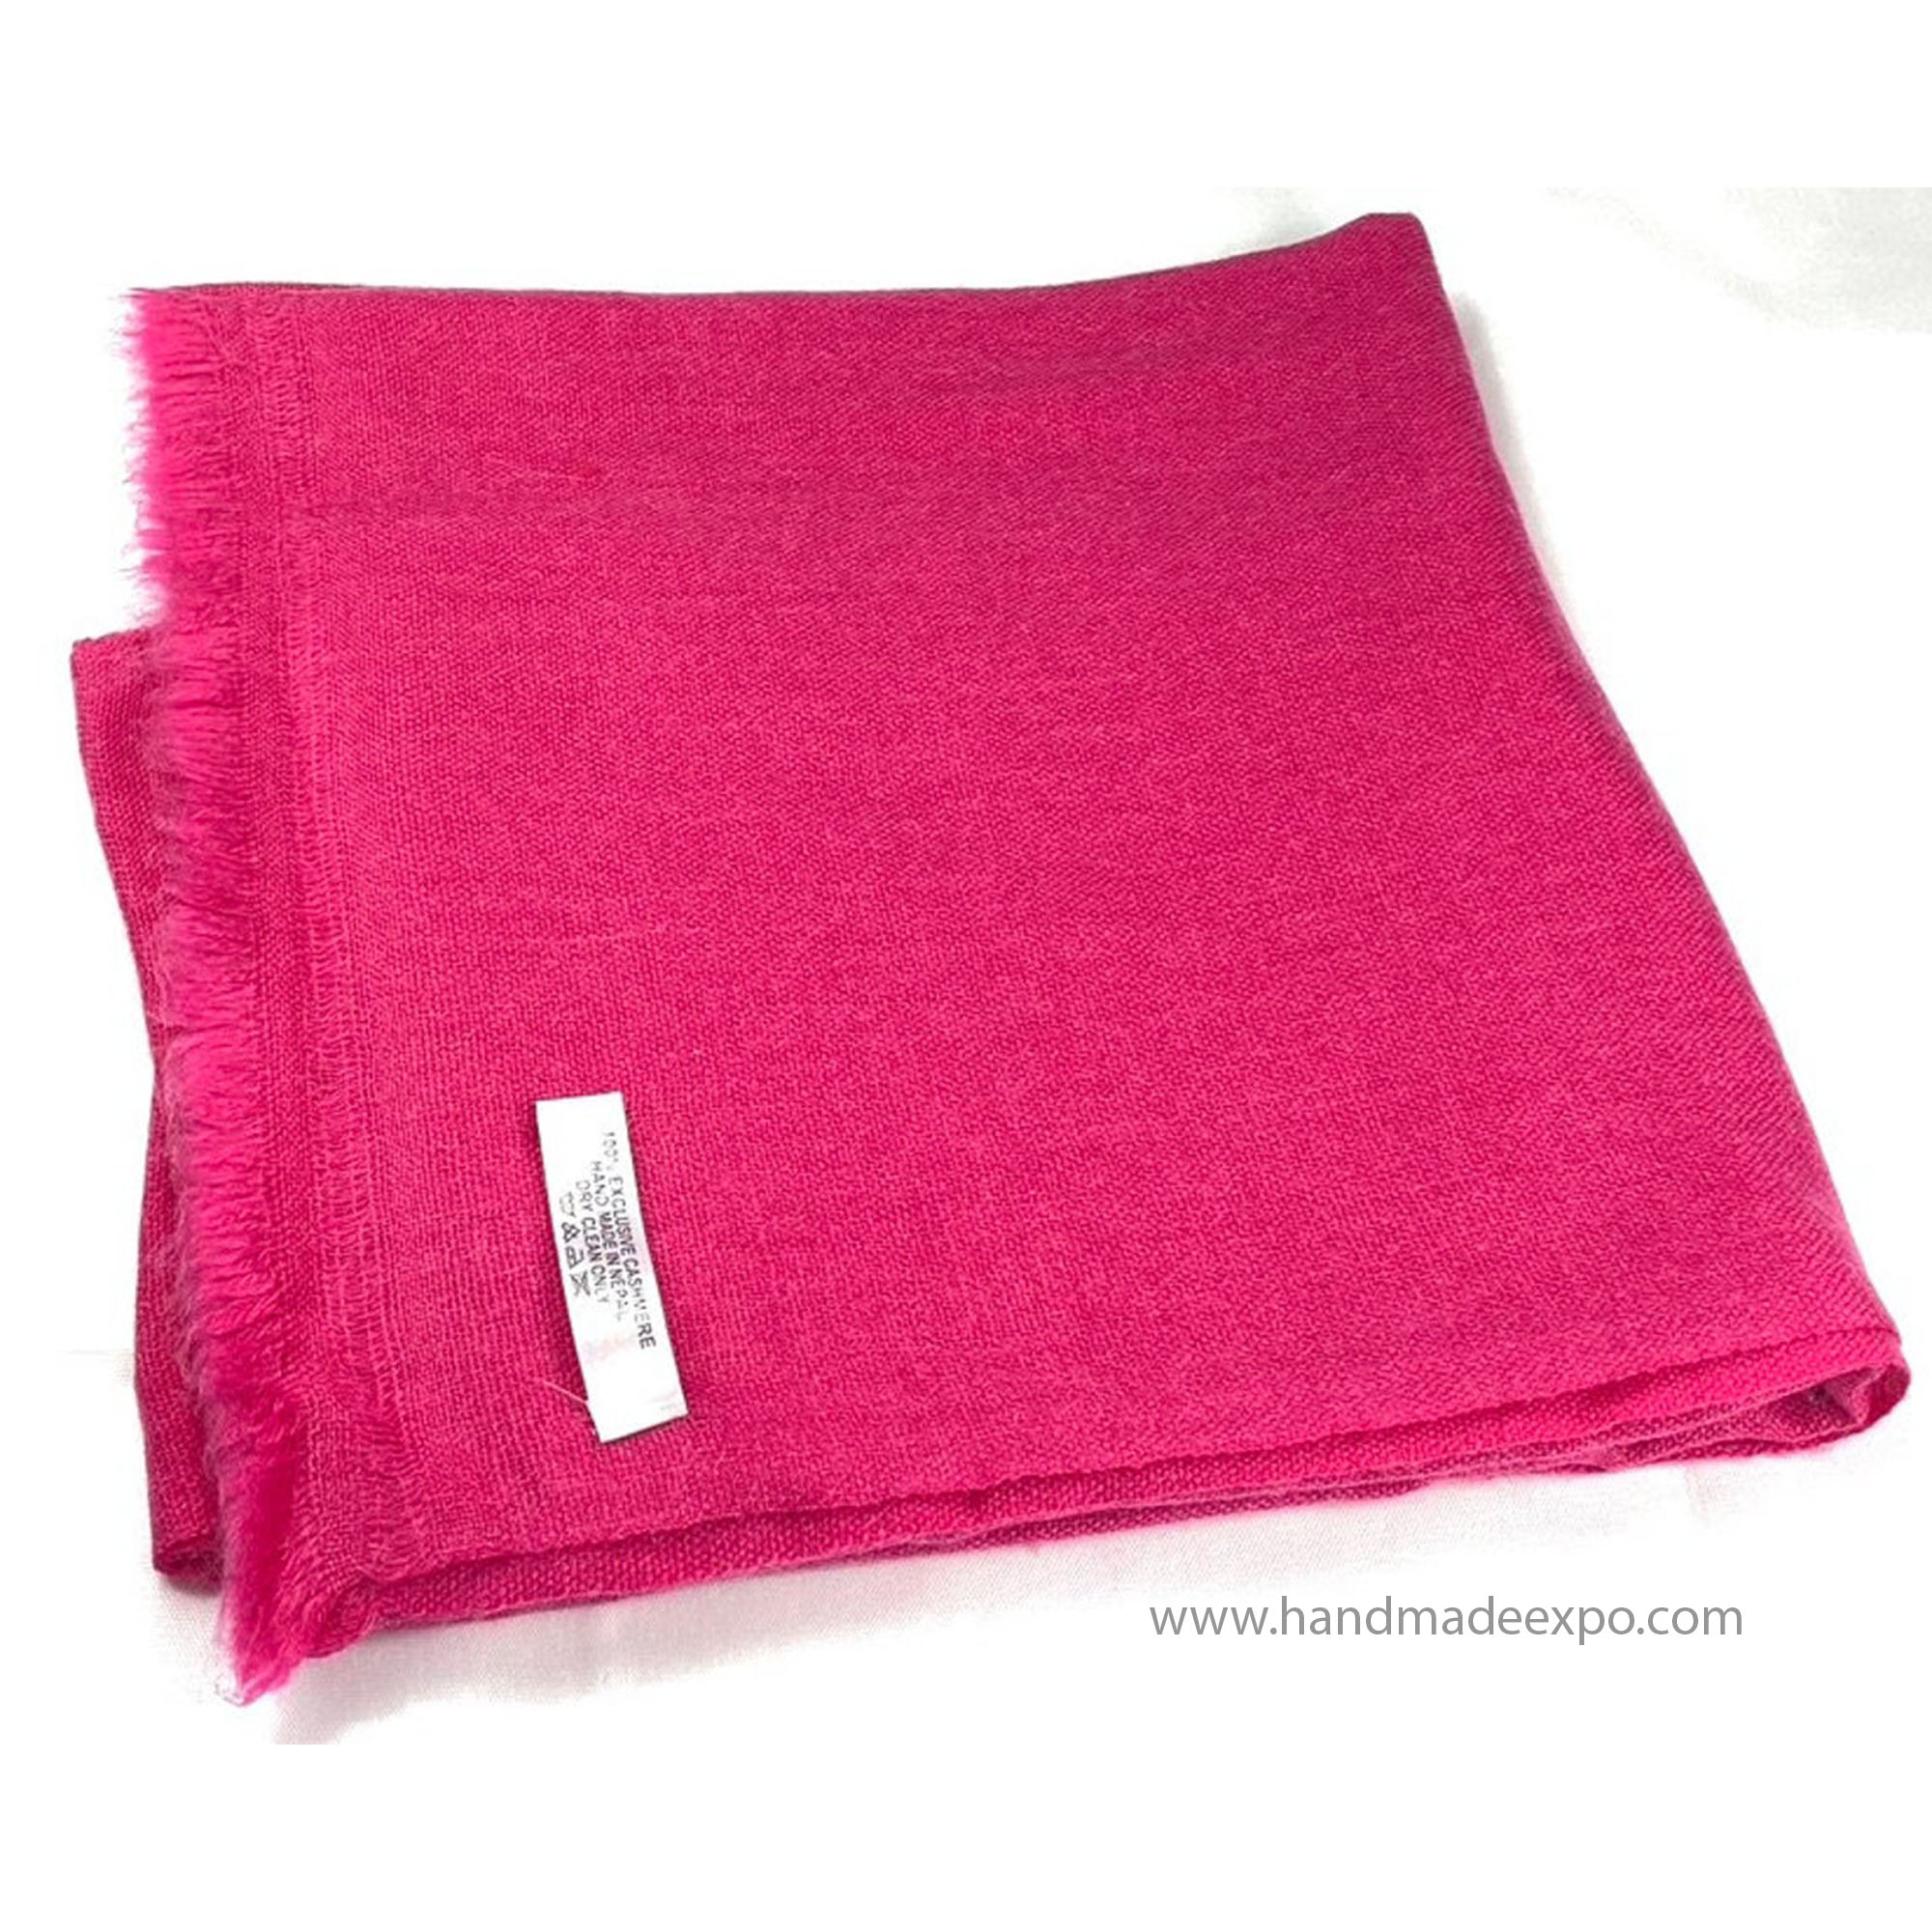 Pashmina Shawl, Nepali Handmade Shawl, In Four Ply Wool, Color Dye dark Pink Color